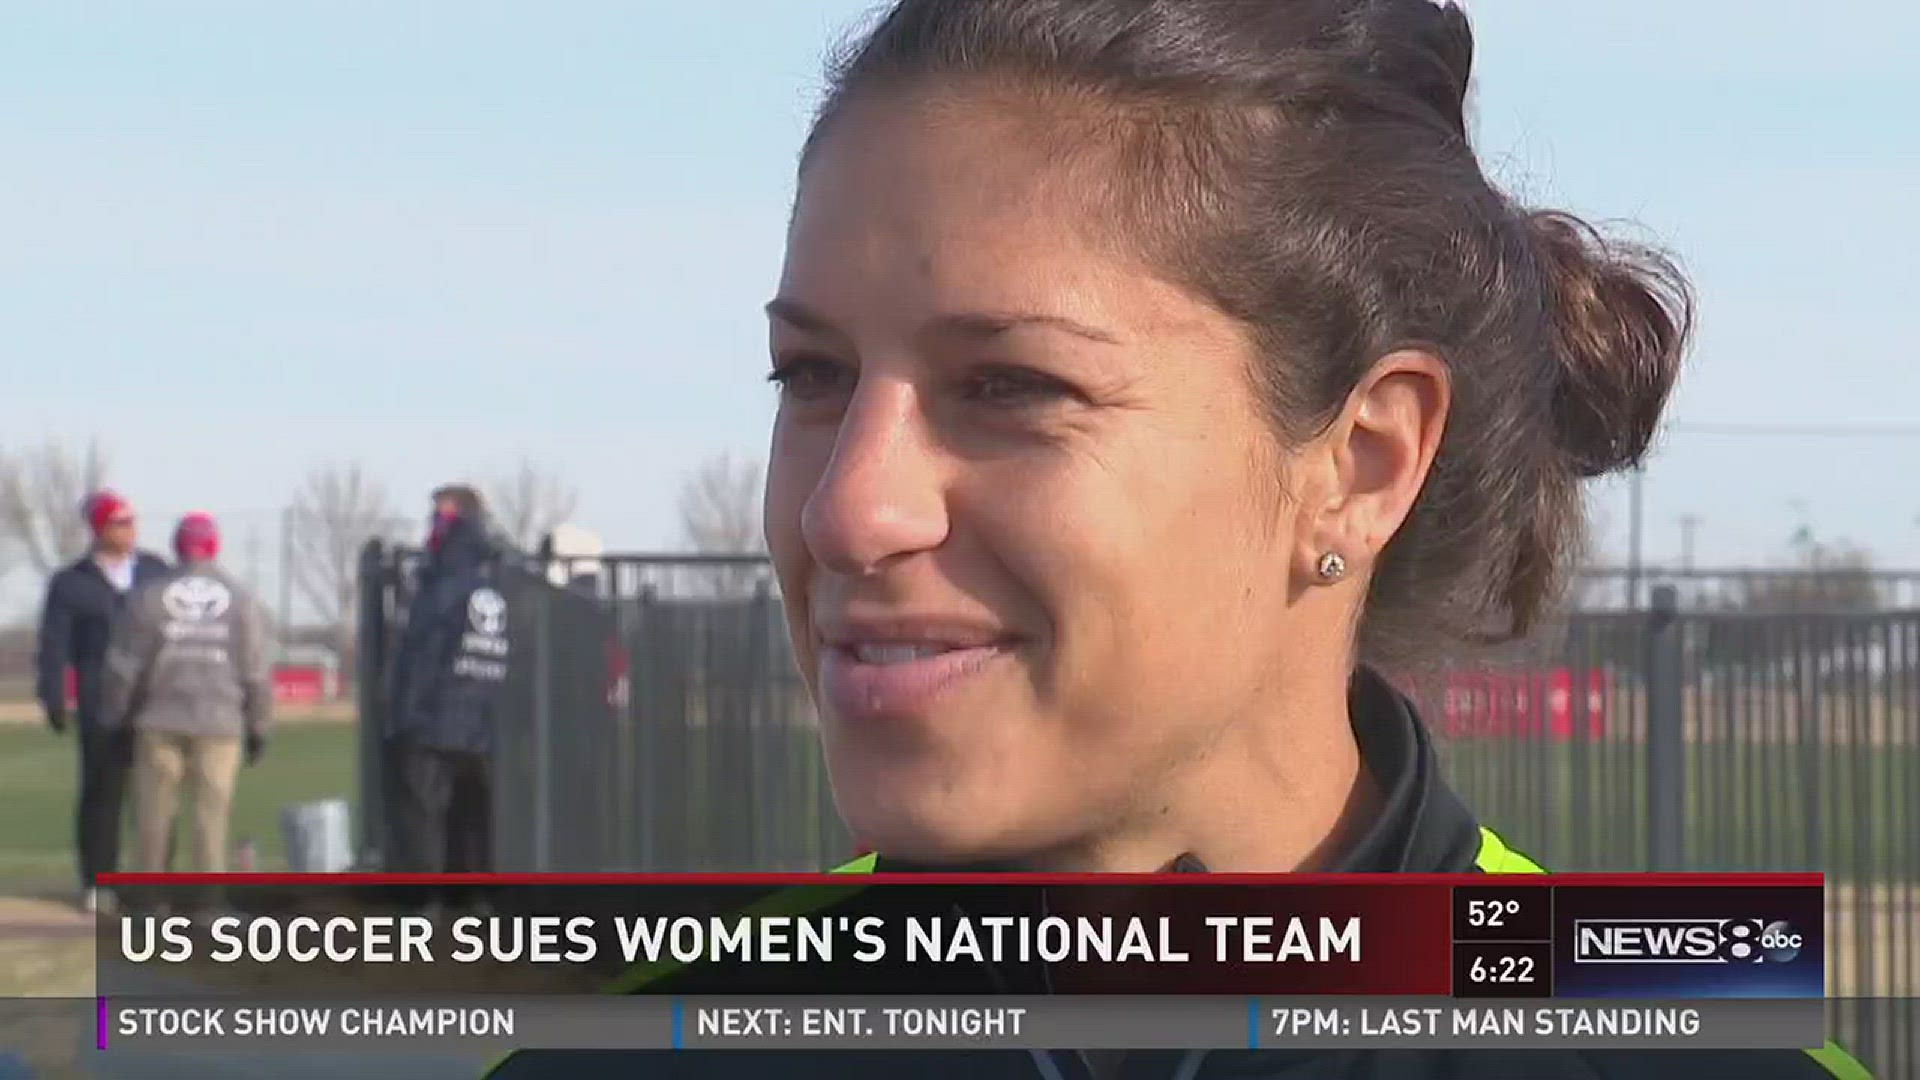 U.S. Soccer has sued the Women's National Team over the collective bargaining agreement. Ted Madden reports.